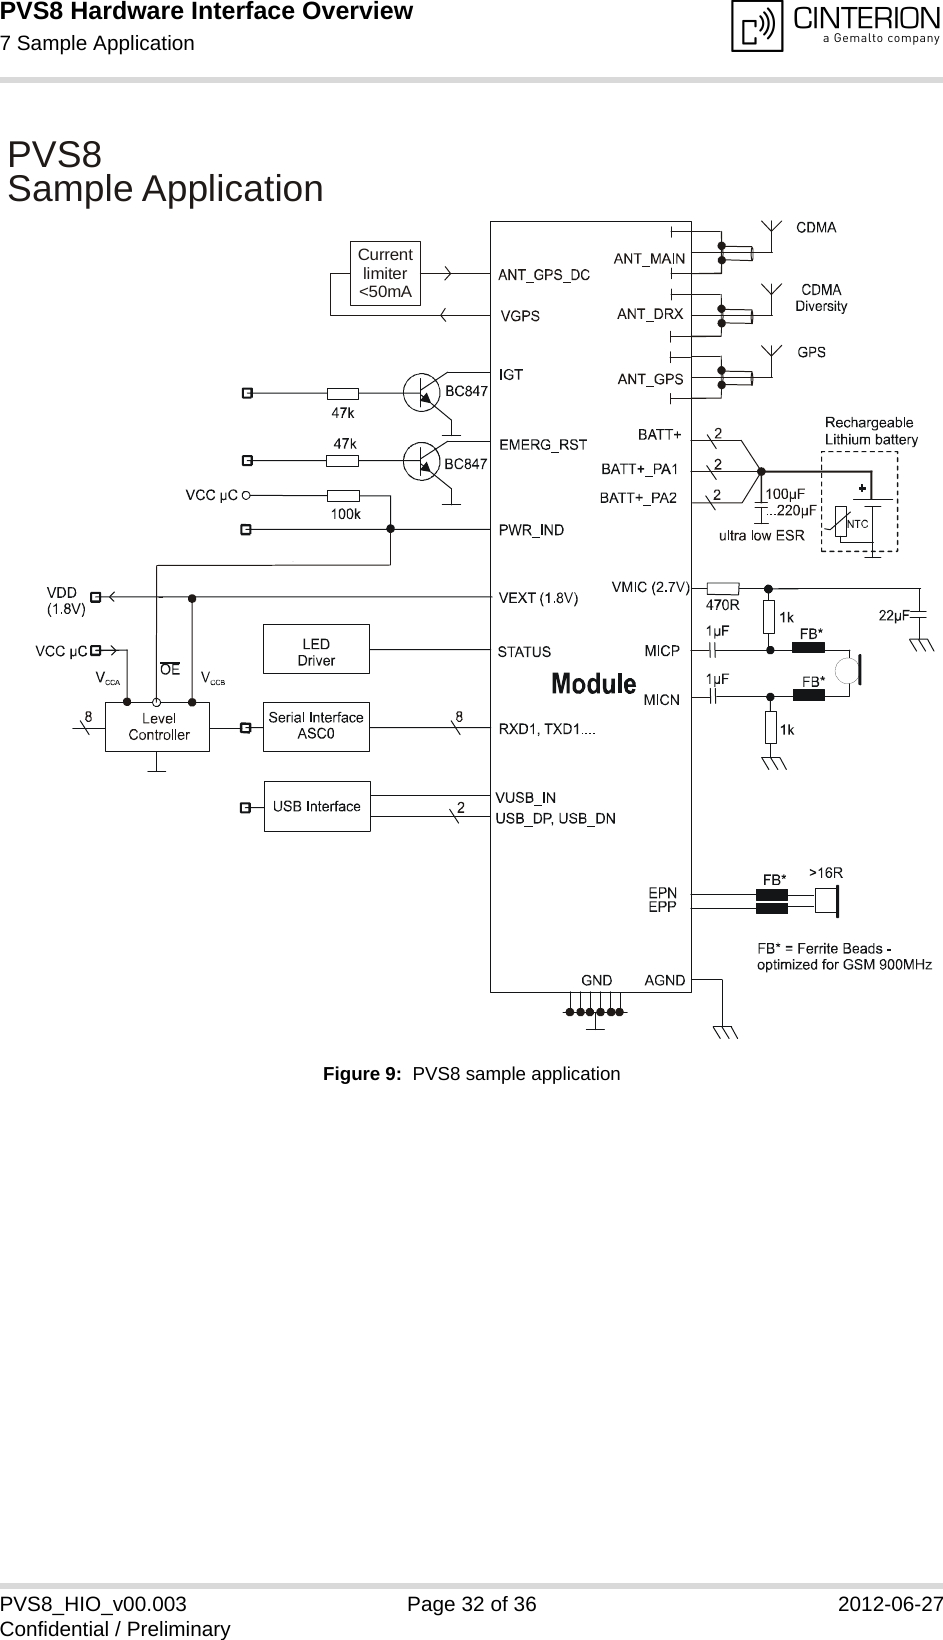 PVS8 Hardware Interface Overview7 Sample Application32PVS8_HIO_v00.003 Page 32 of 36 2012-06-27Confidential / PreliminaryFigure 9:  PVS8 sample applicationPVS8  Application SampleCurrentlimiter&lt;50mA